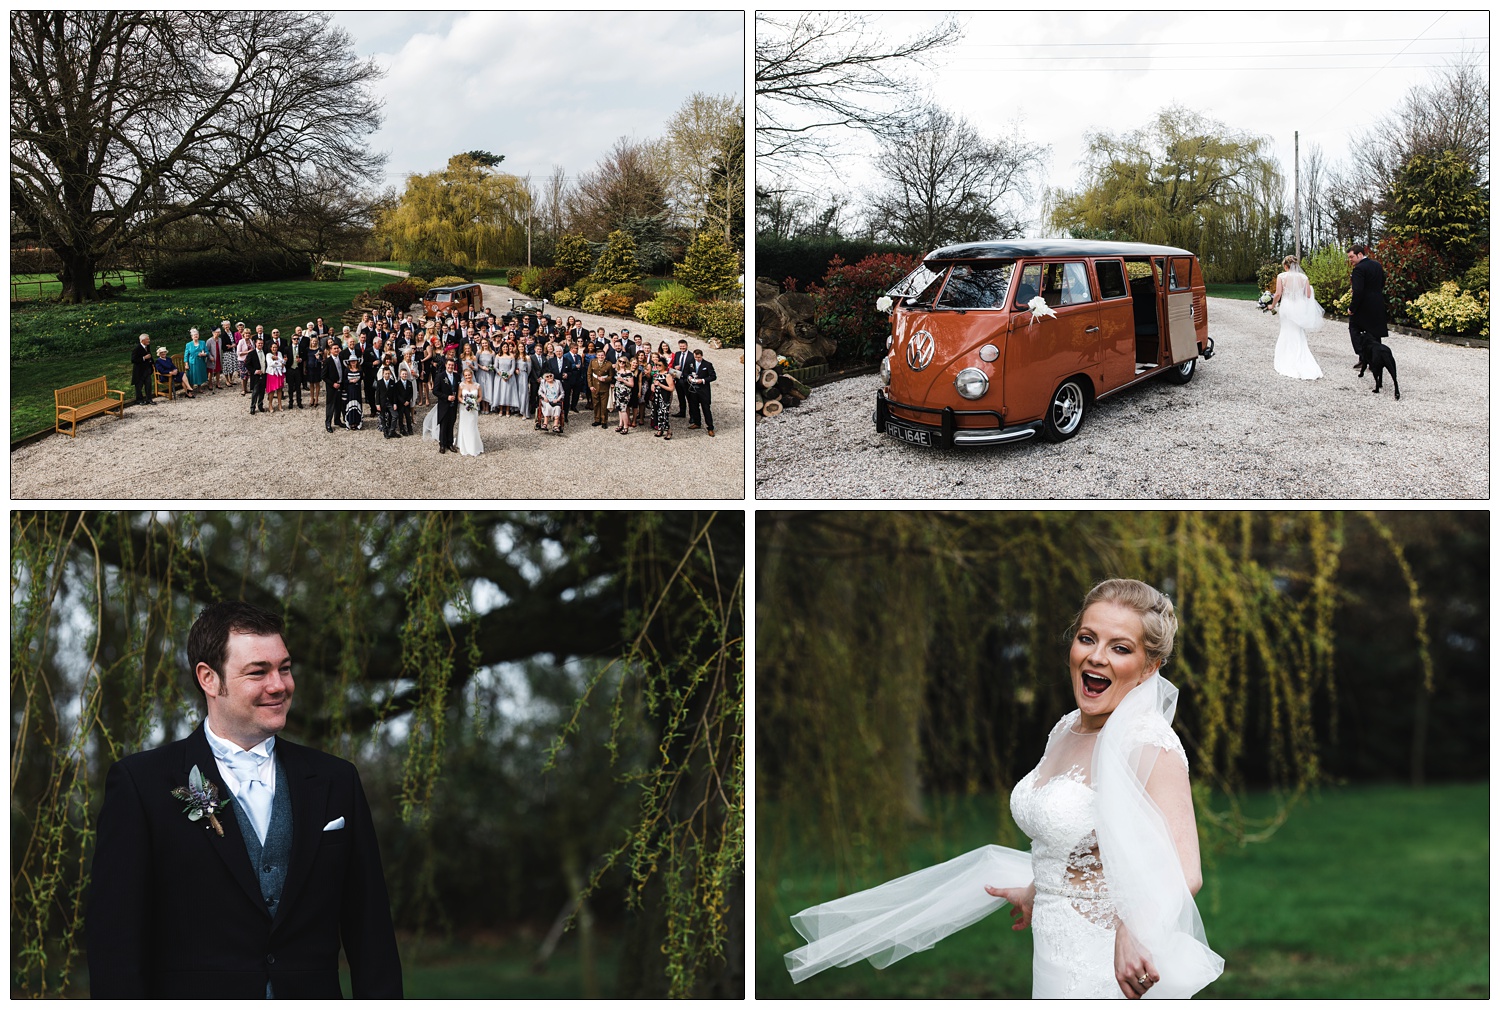 A burnt orange VW Camper van. A picture from above of everyone at the wedding